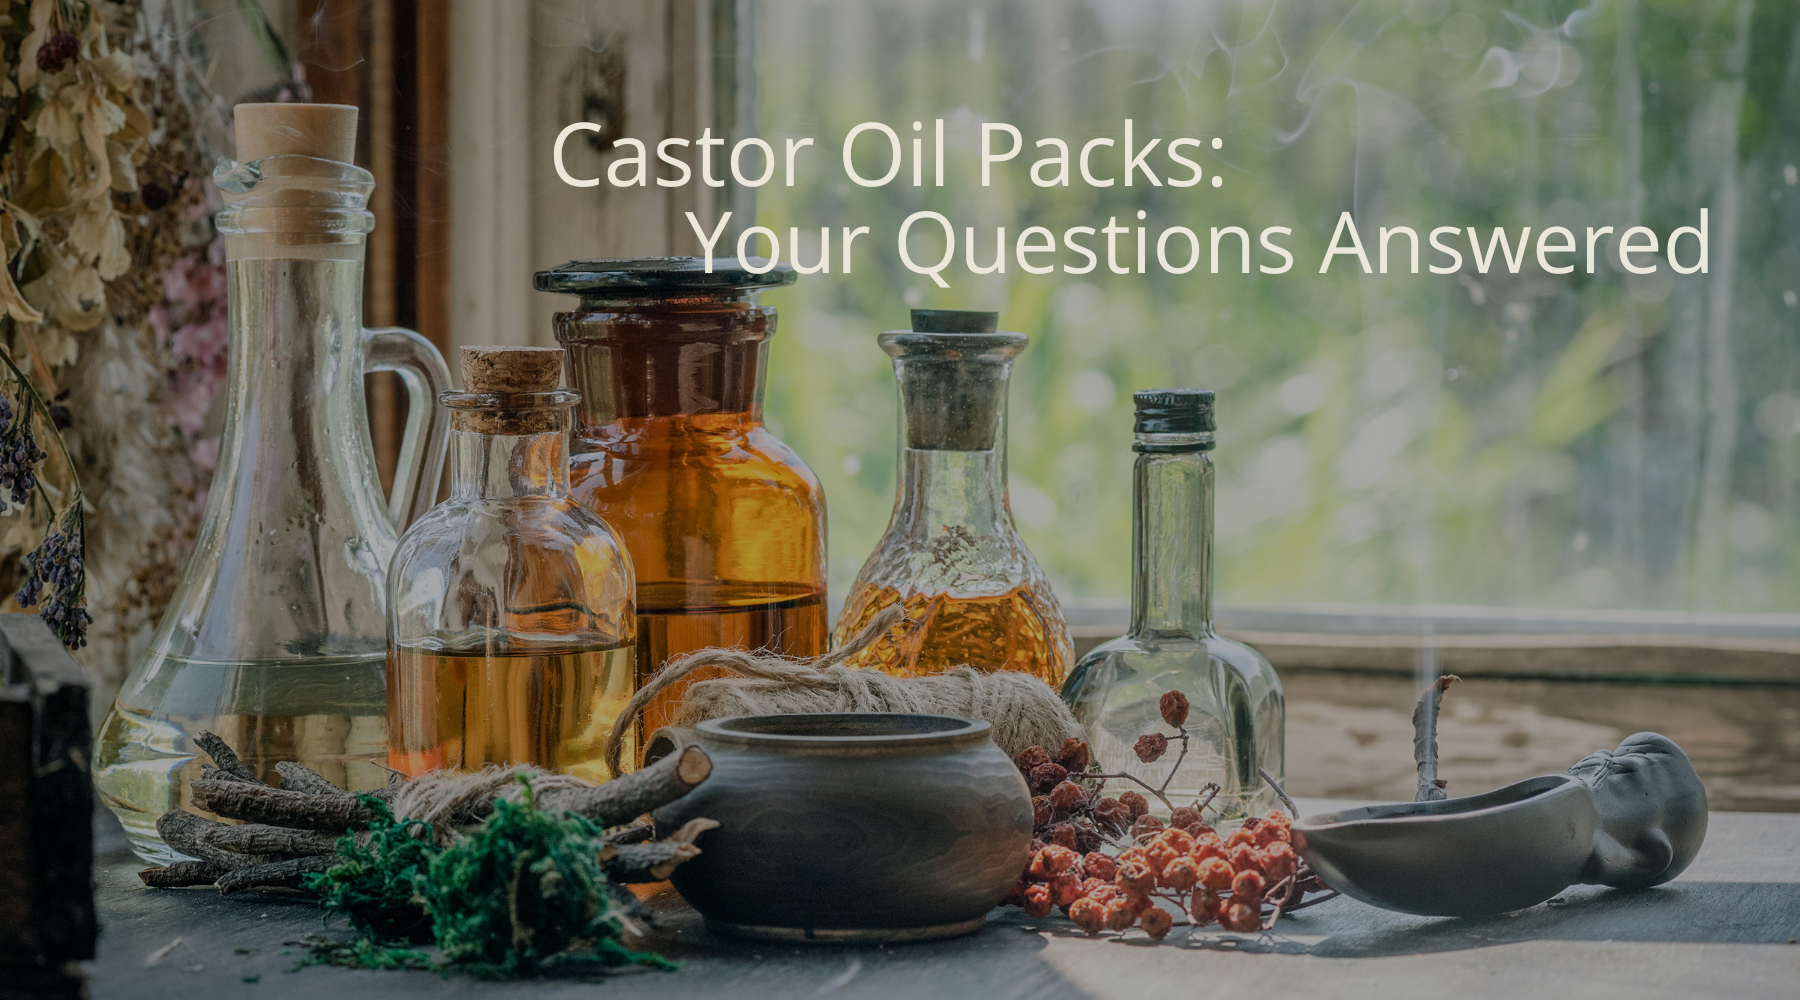 Castor Oil Packs: Your Questions Answered